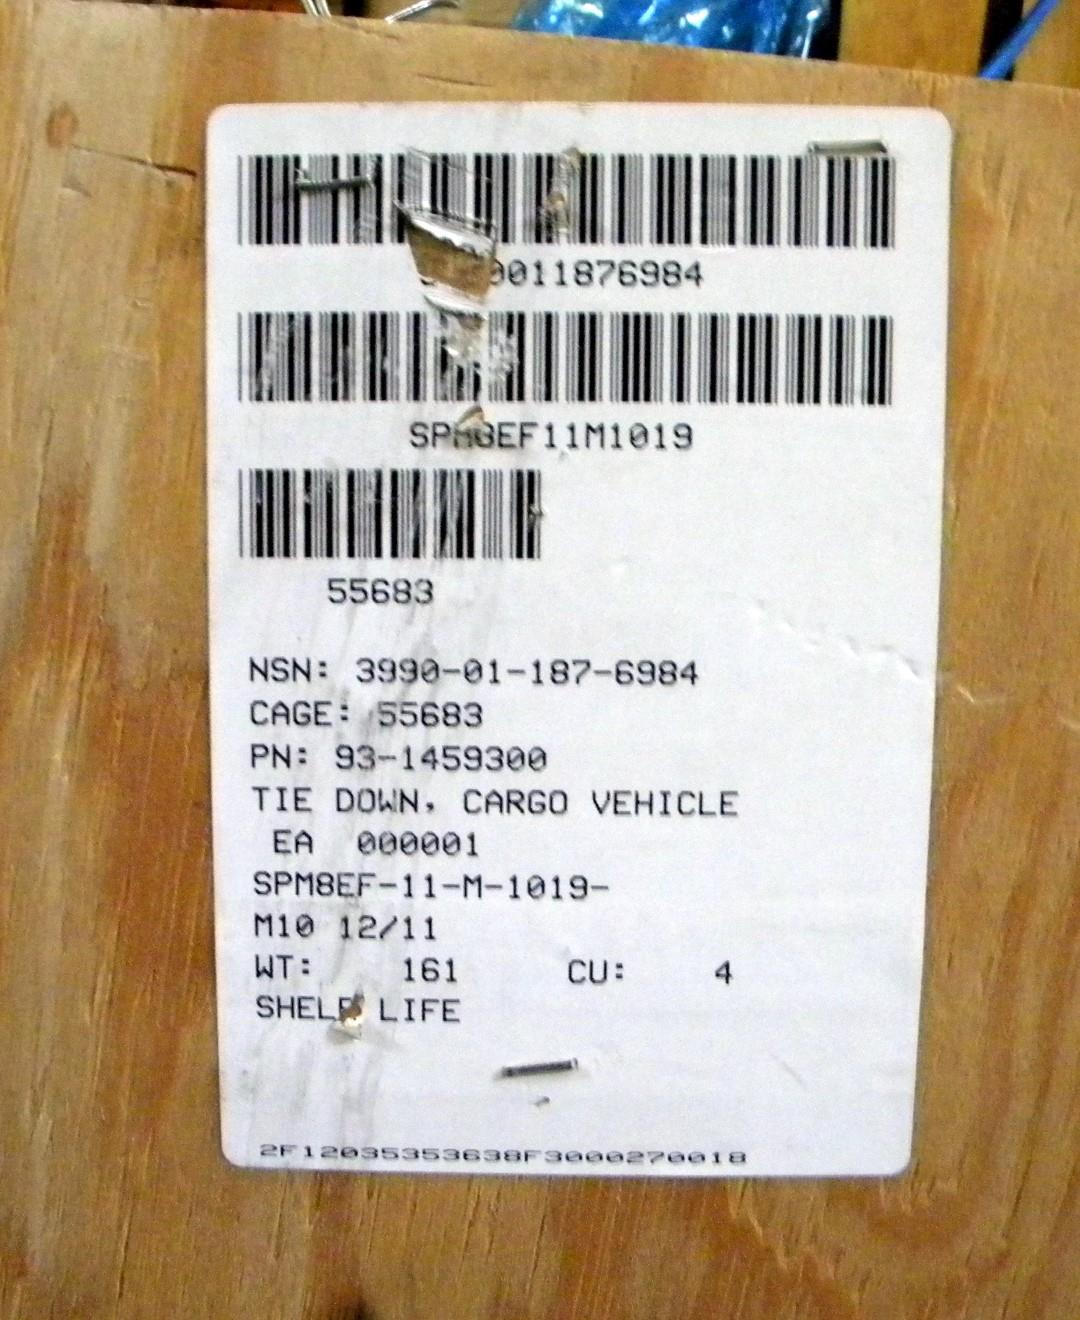 HEM-163 | 3990-01-187-6984 Vehicle Cargo Tie Down for LVS Power Unit MK48 and Trailer Family. NOS.  (2).JPG